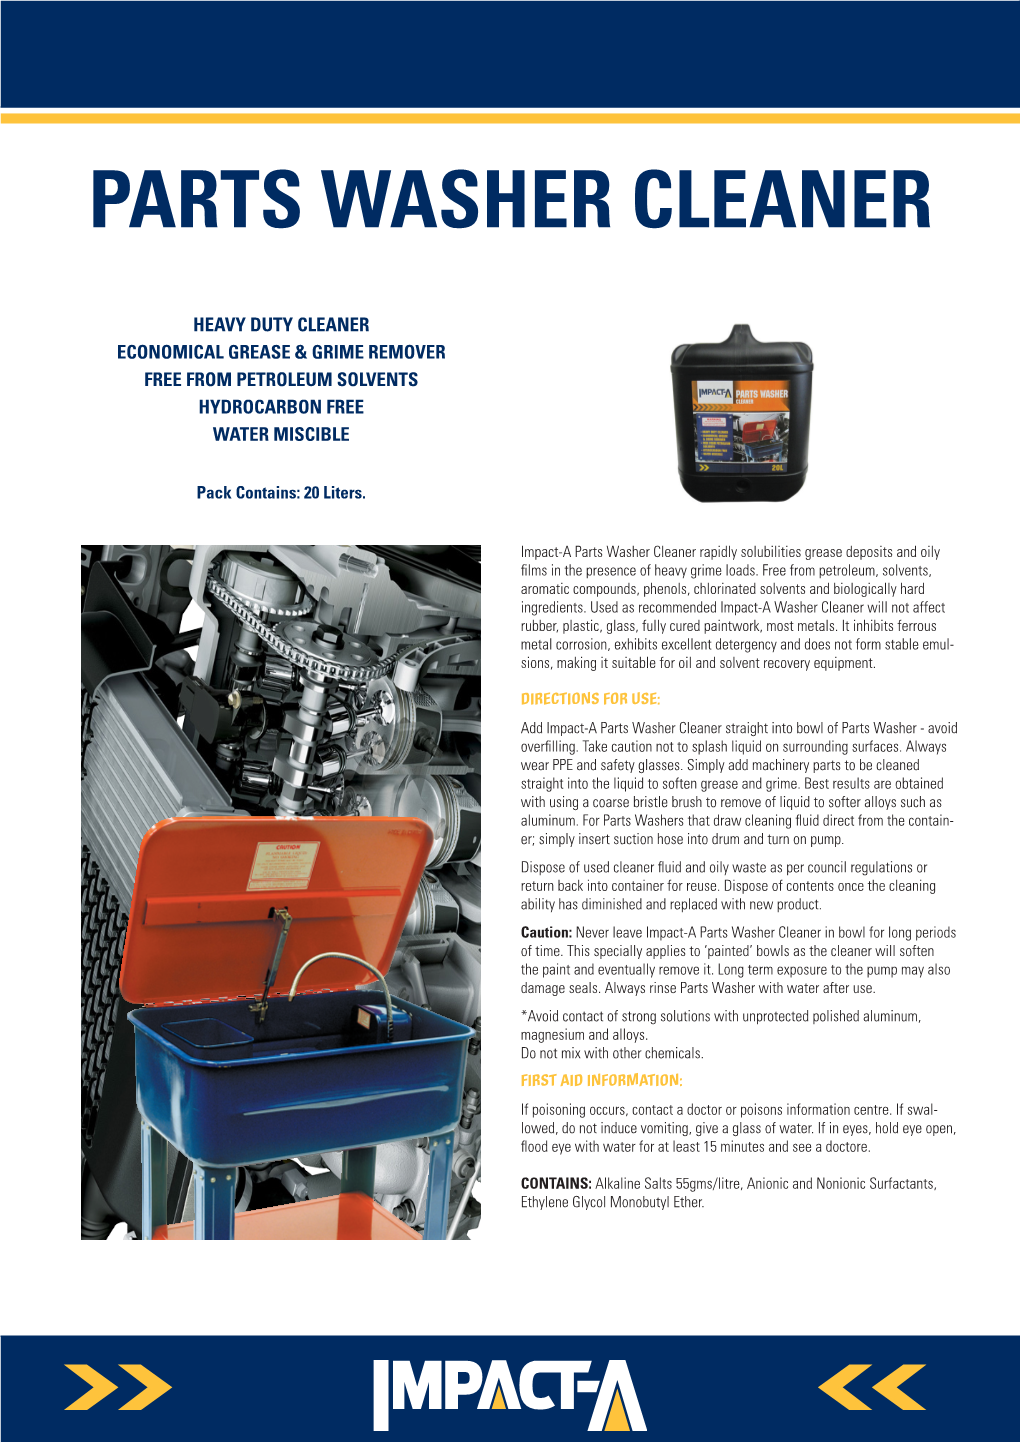 Parts Washer Cleaner